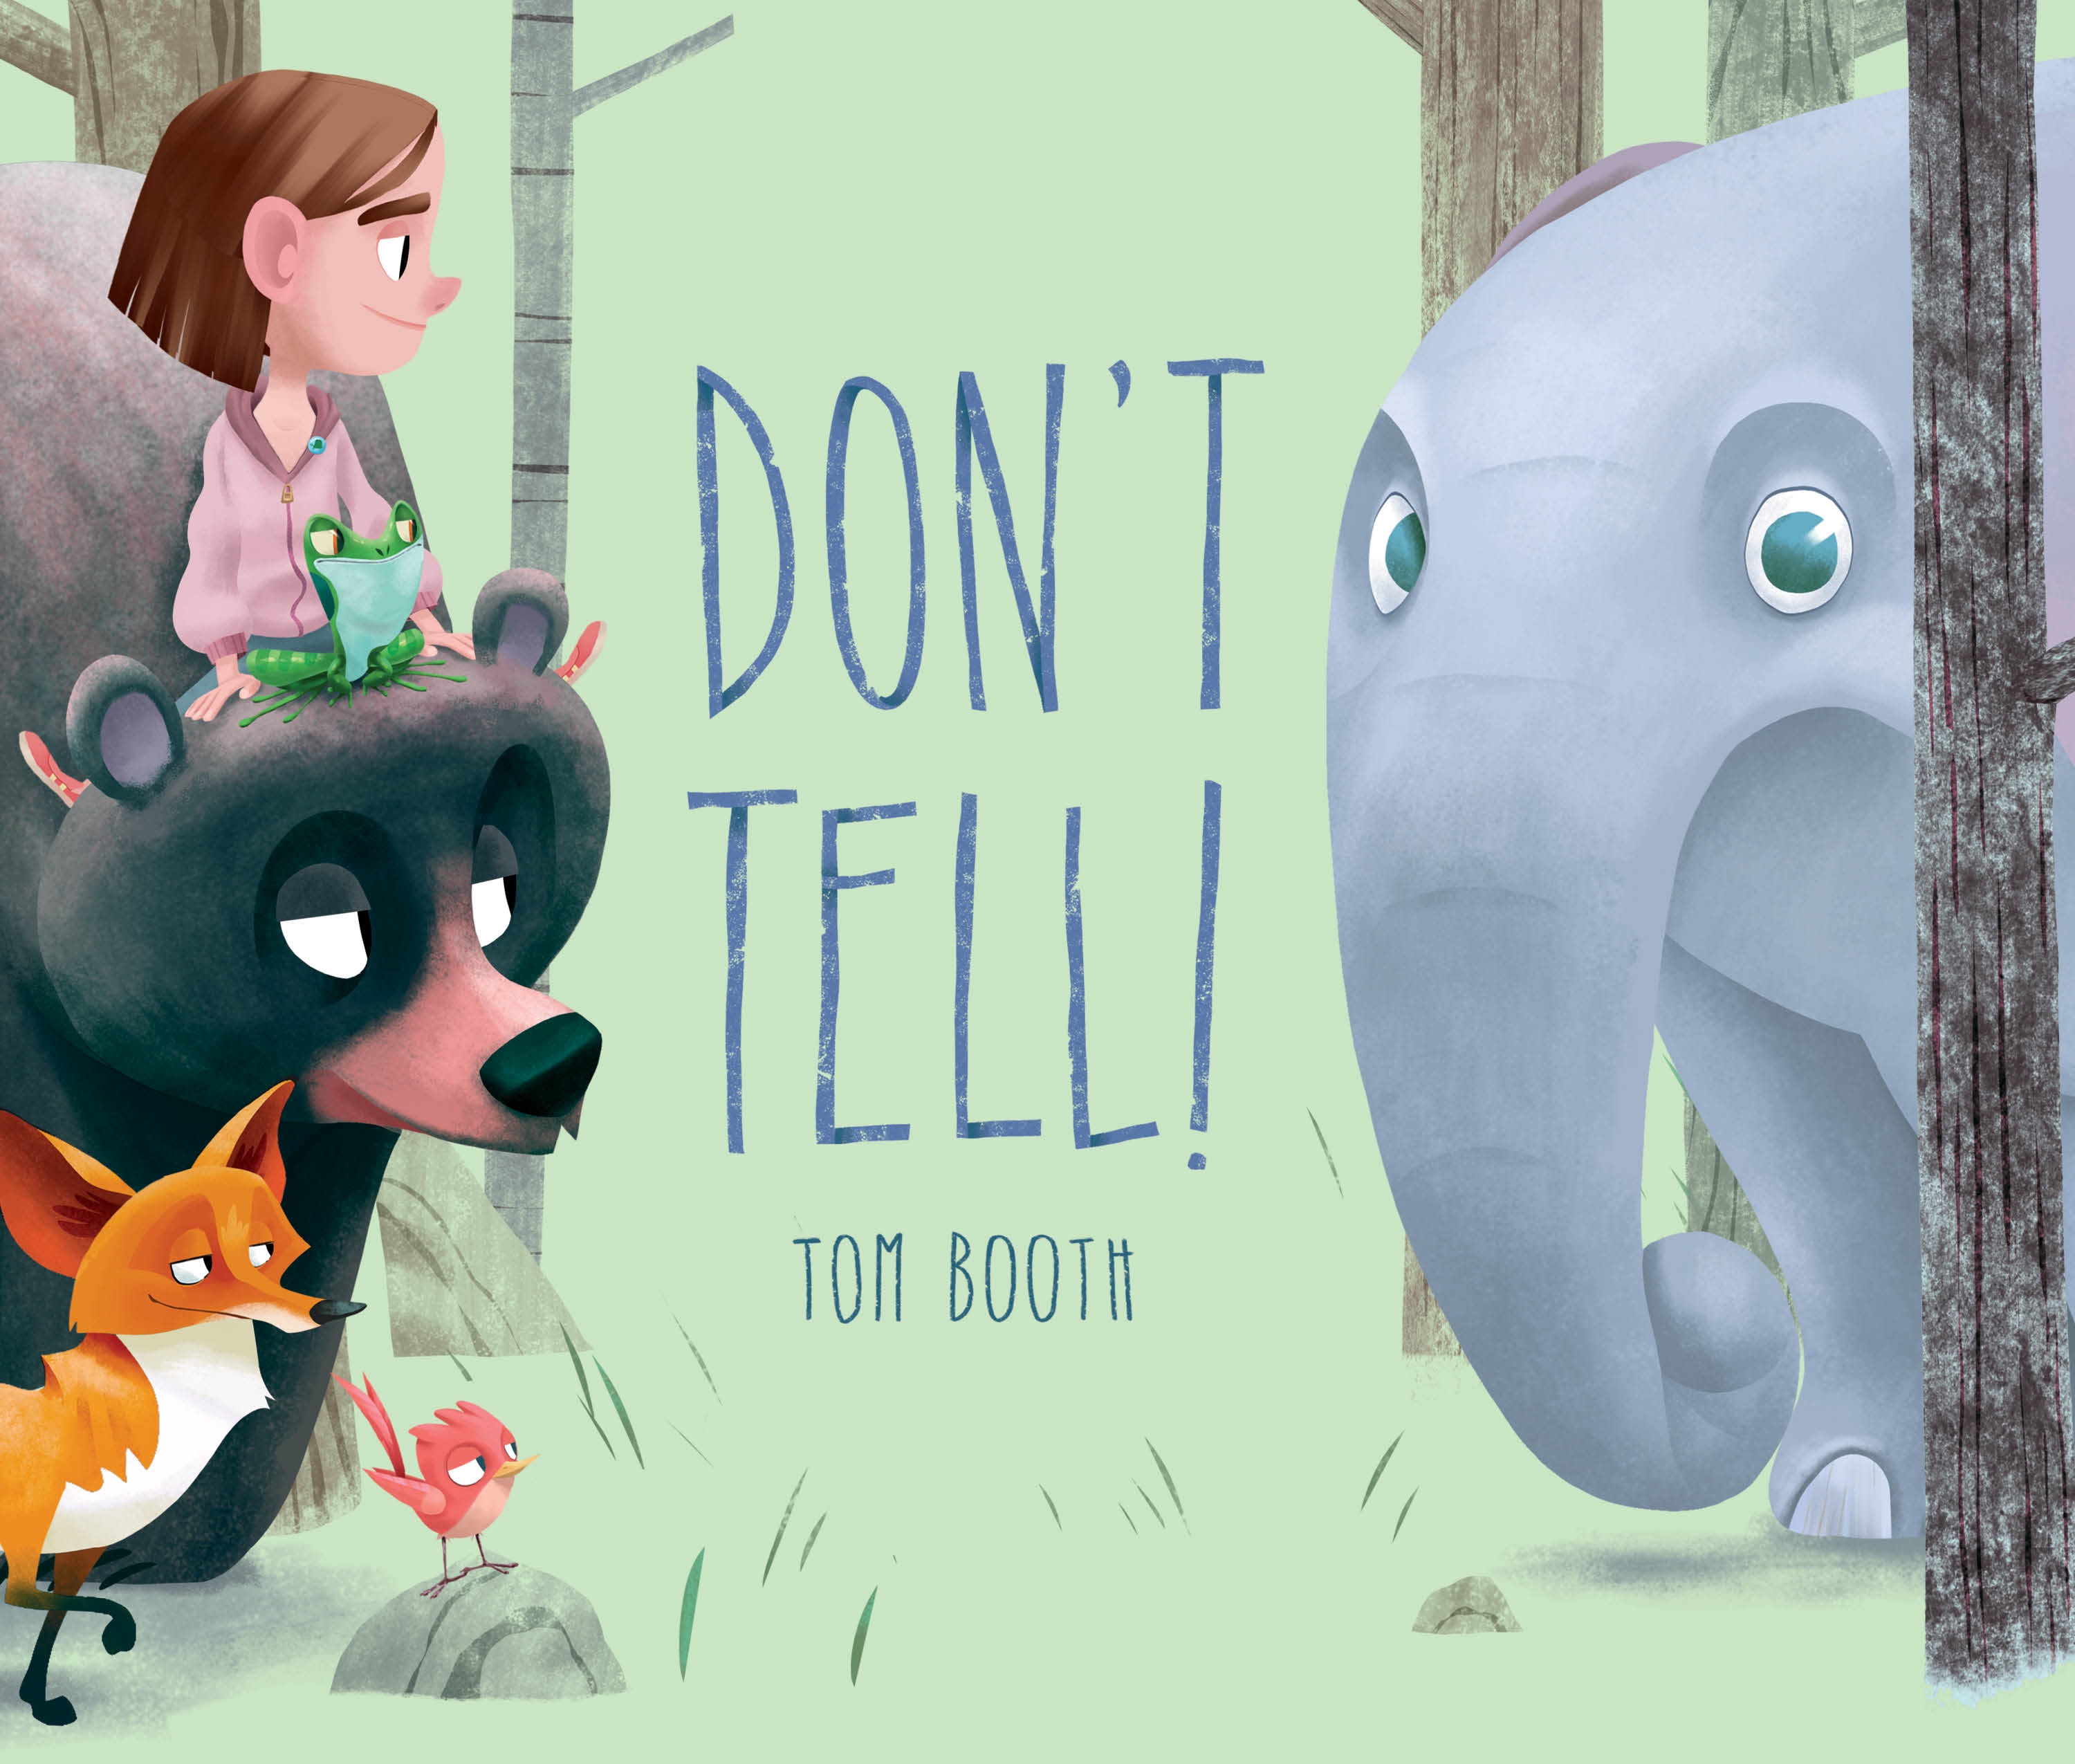 Sunday Story Time with Tom Booth (Author & Illustrator of Don't Tell!)